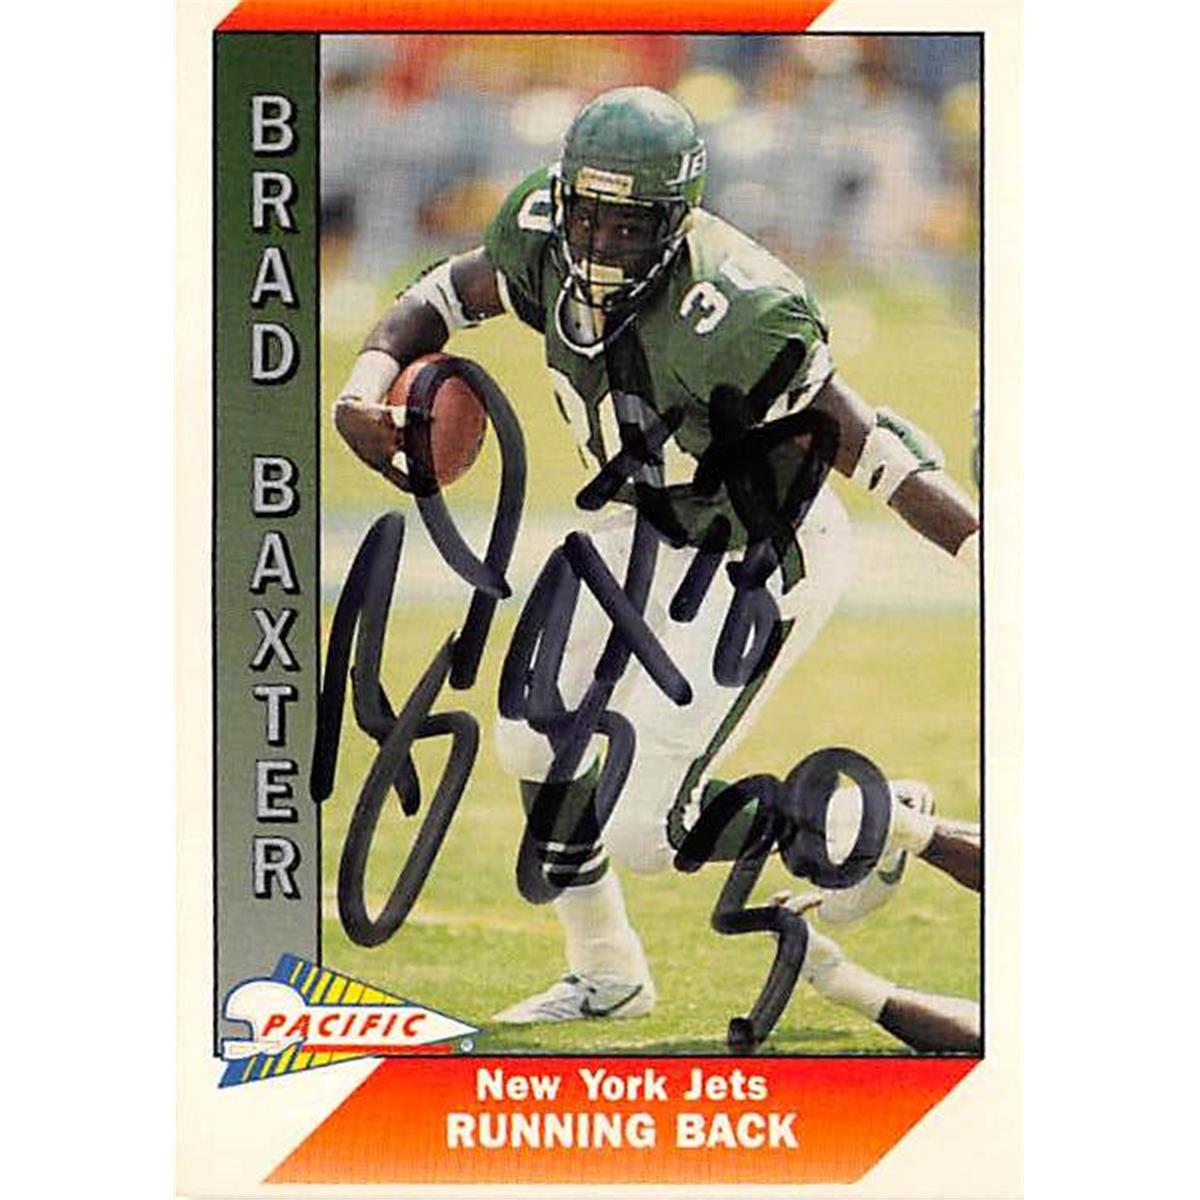 Picture of Autograph Warehouse 366686 Brad Baxter Autographed Football Card - New York Jets 1991 Pacific No.361